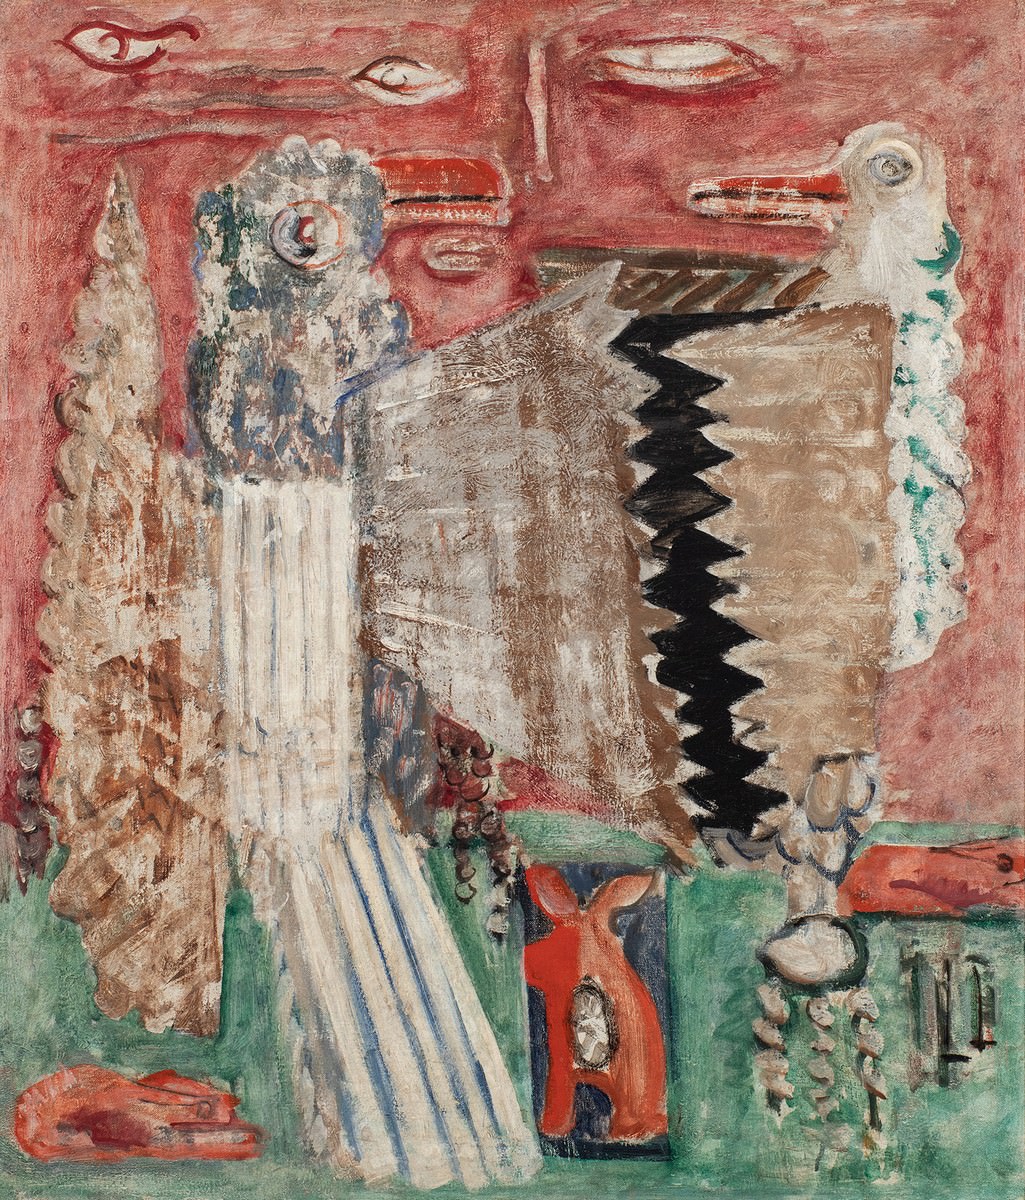 Fig. 6 – Composition, 1941-42, Mark Rothko, oil on canvas, 28 1/2 x 24 1/2 inches, 72,4 x 6x,2 cm, signed. Courtesy of Michael Rosenfeld Gallery LLC, New York, NY, USA.